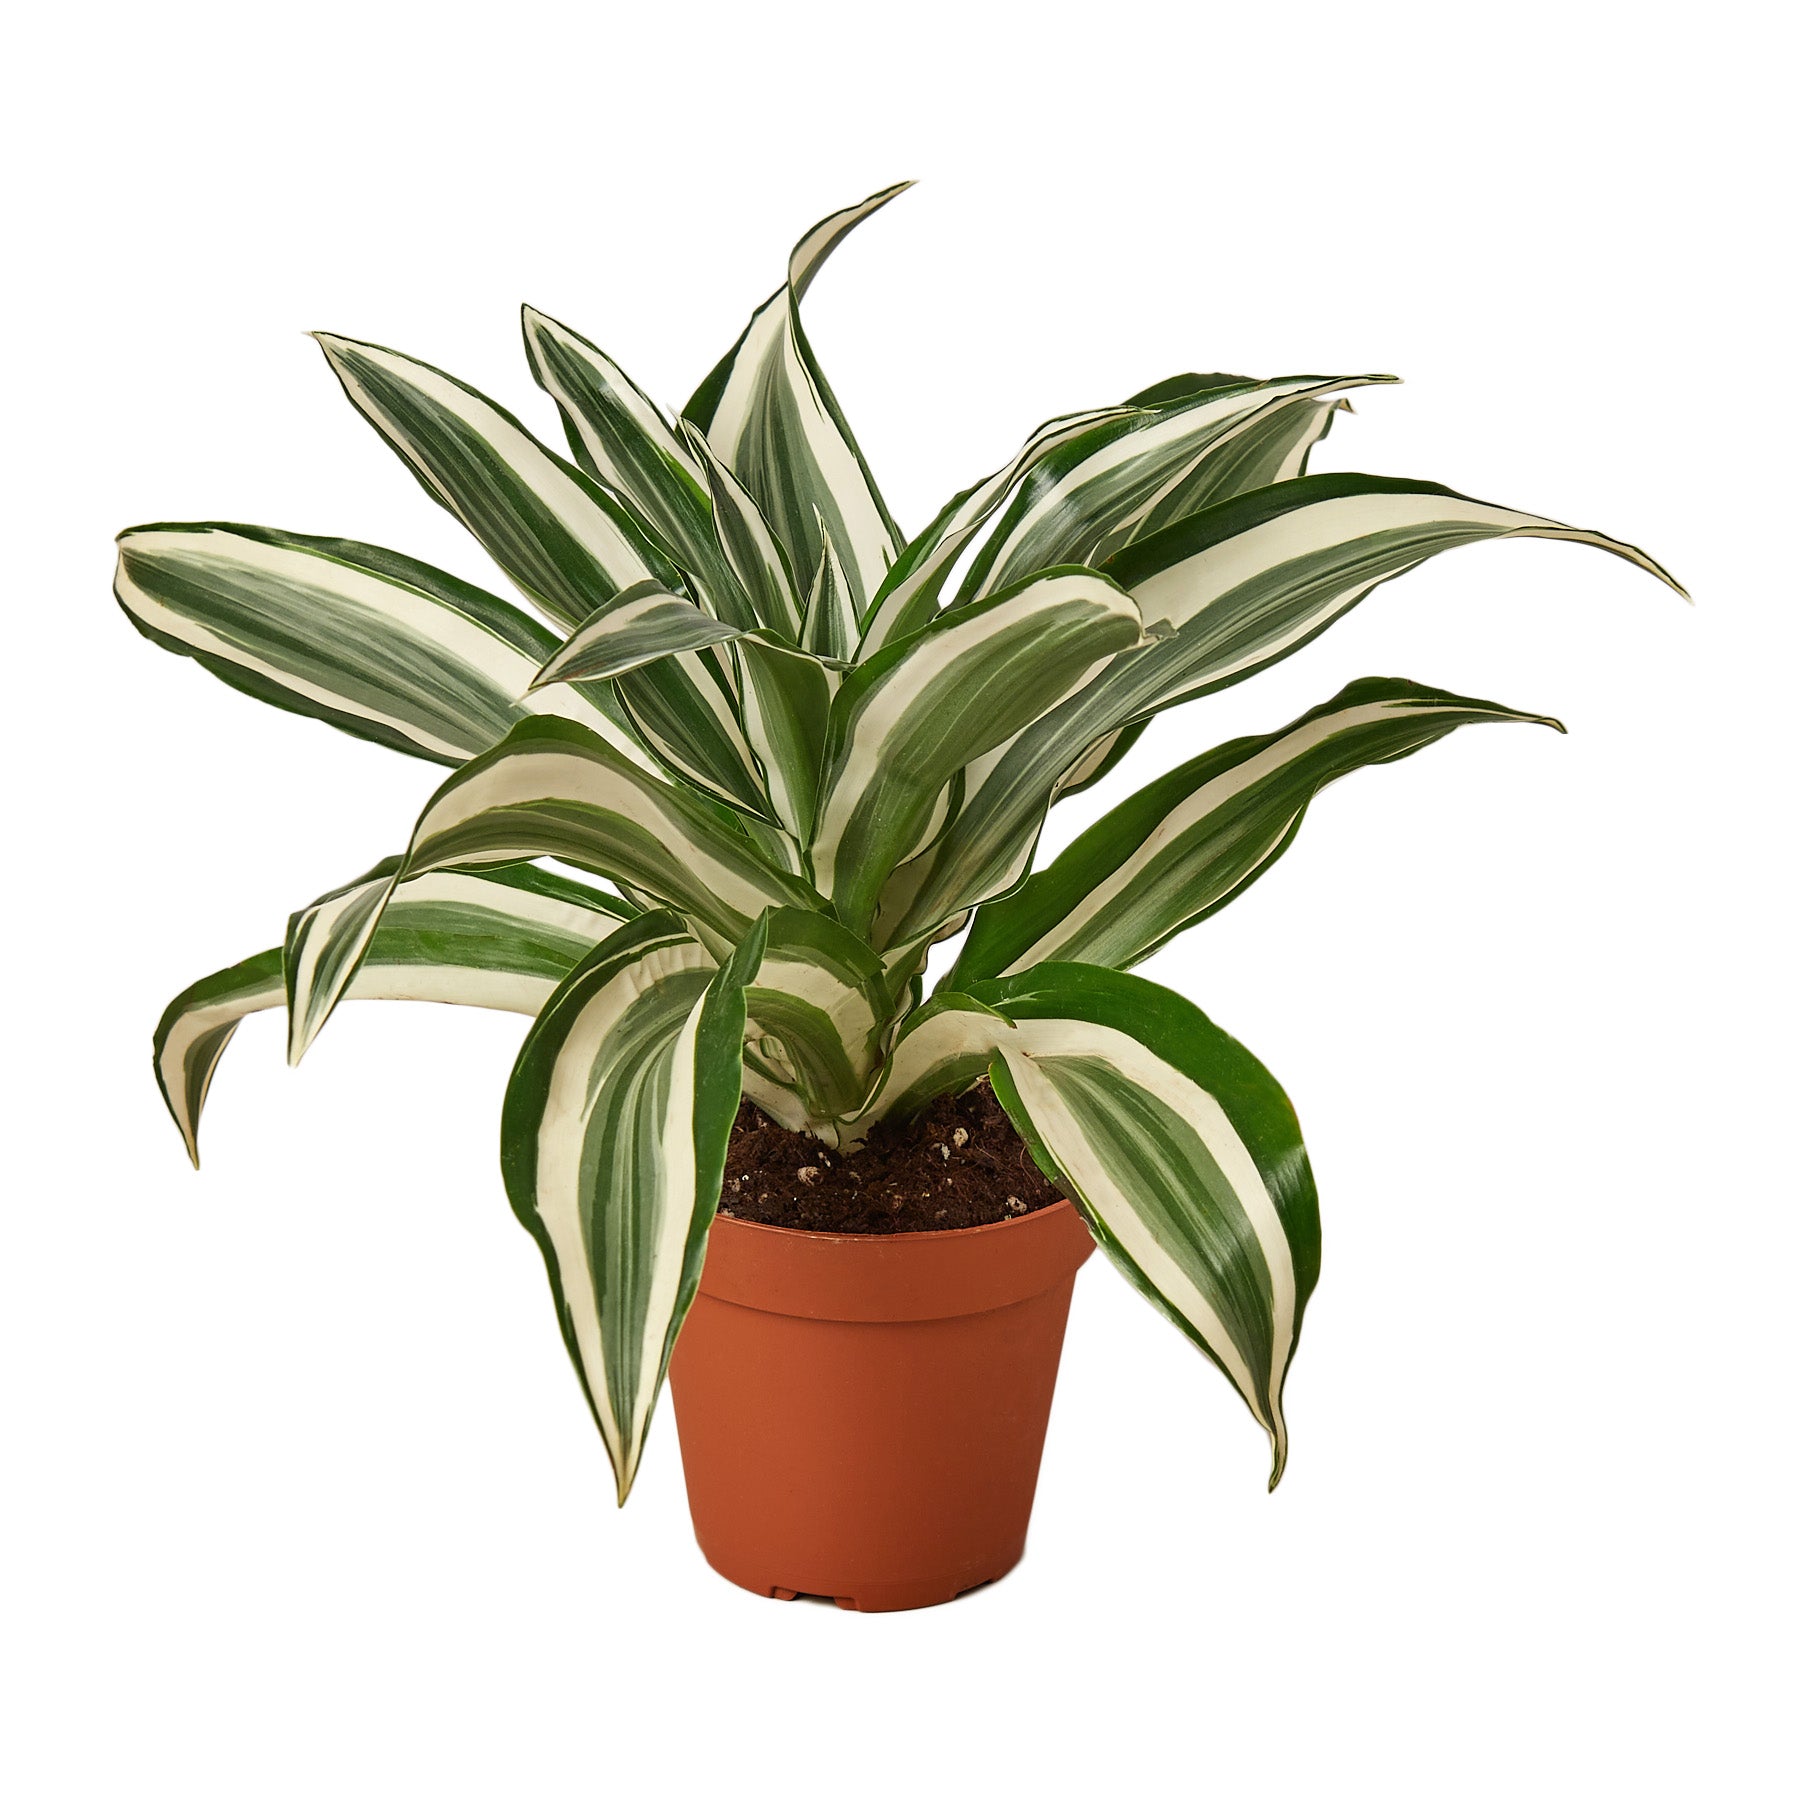 A potted plant with striped foliage.